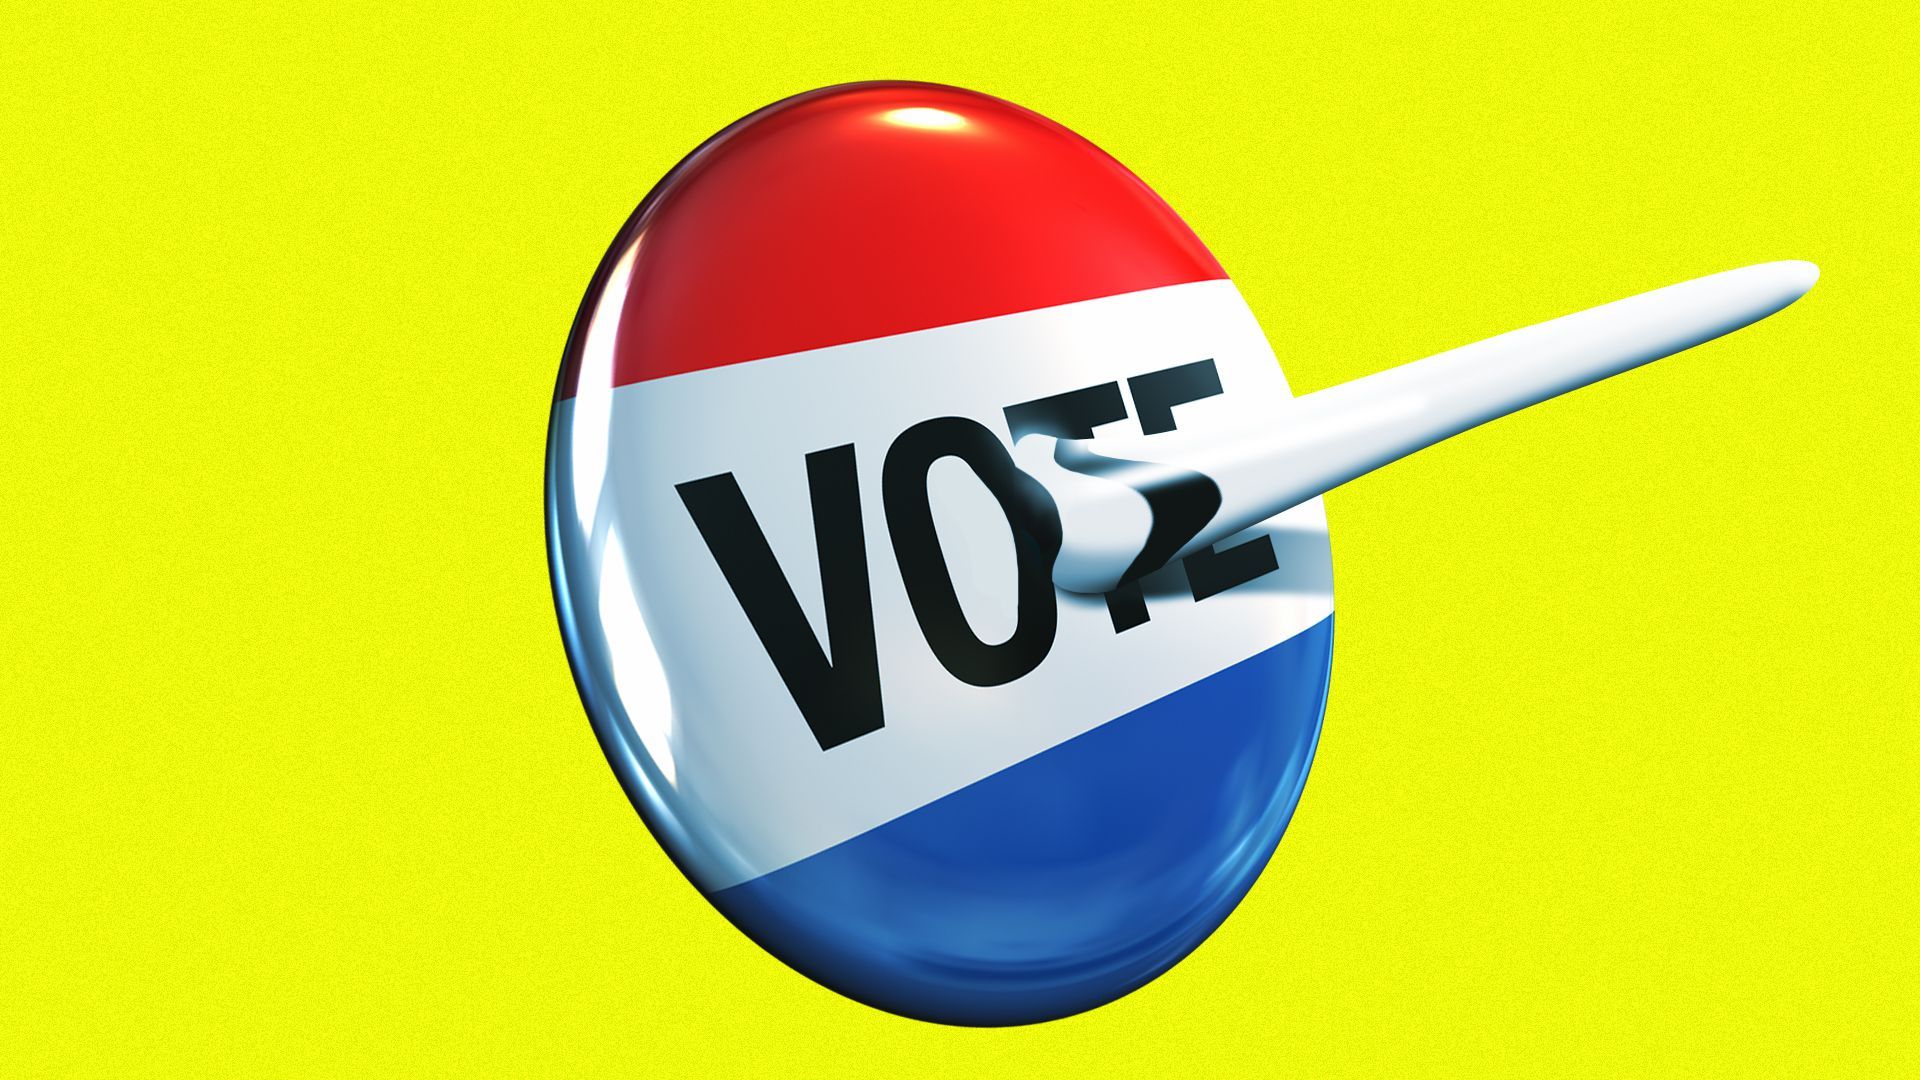 Illustration of a "vote" pin with a long nose growing out of it